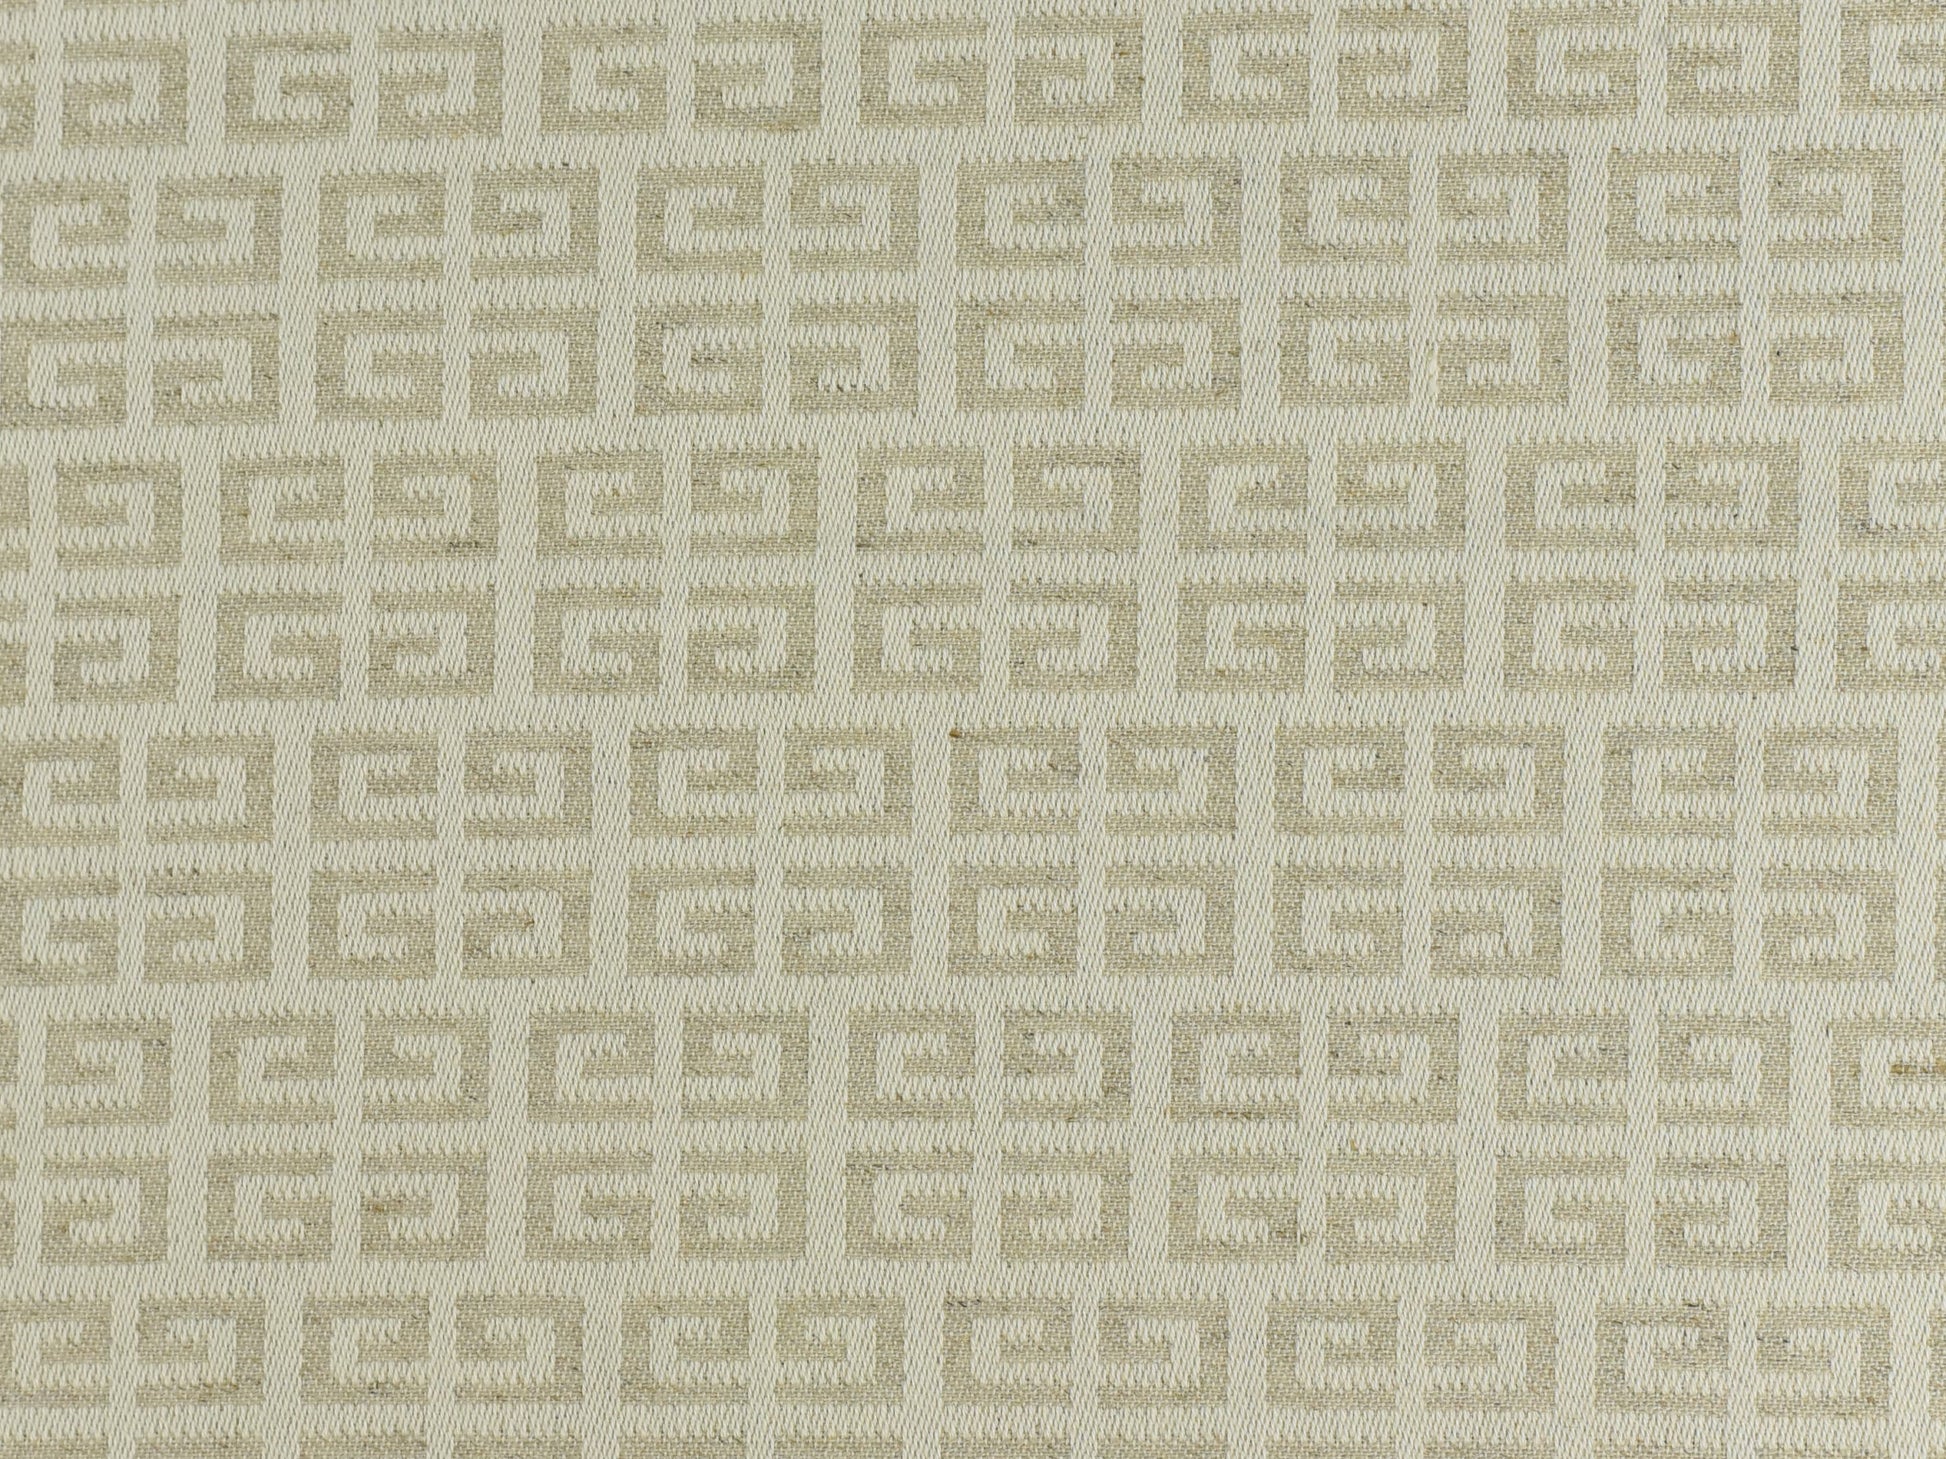 Cotton Linen Only Greek Key Cream Tan Abstract Geometric Upholstery and Curtain Fabric|Lightweight Upholstery Fabric for Pillow Table Runner Cream